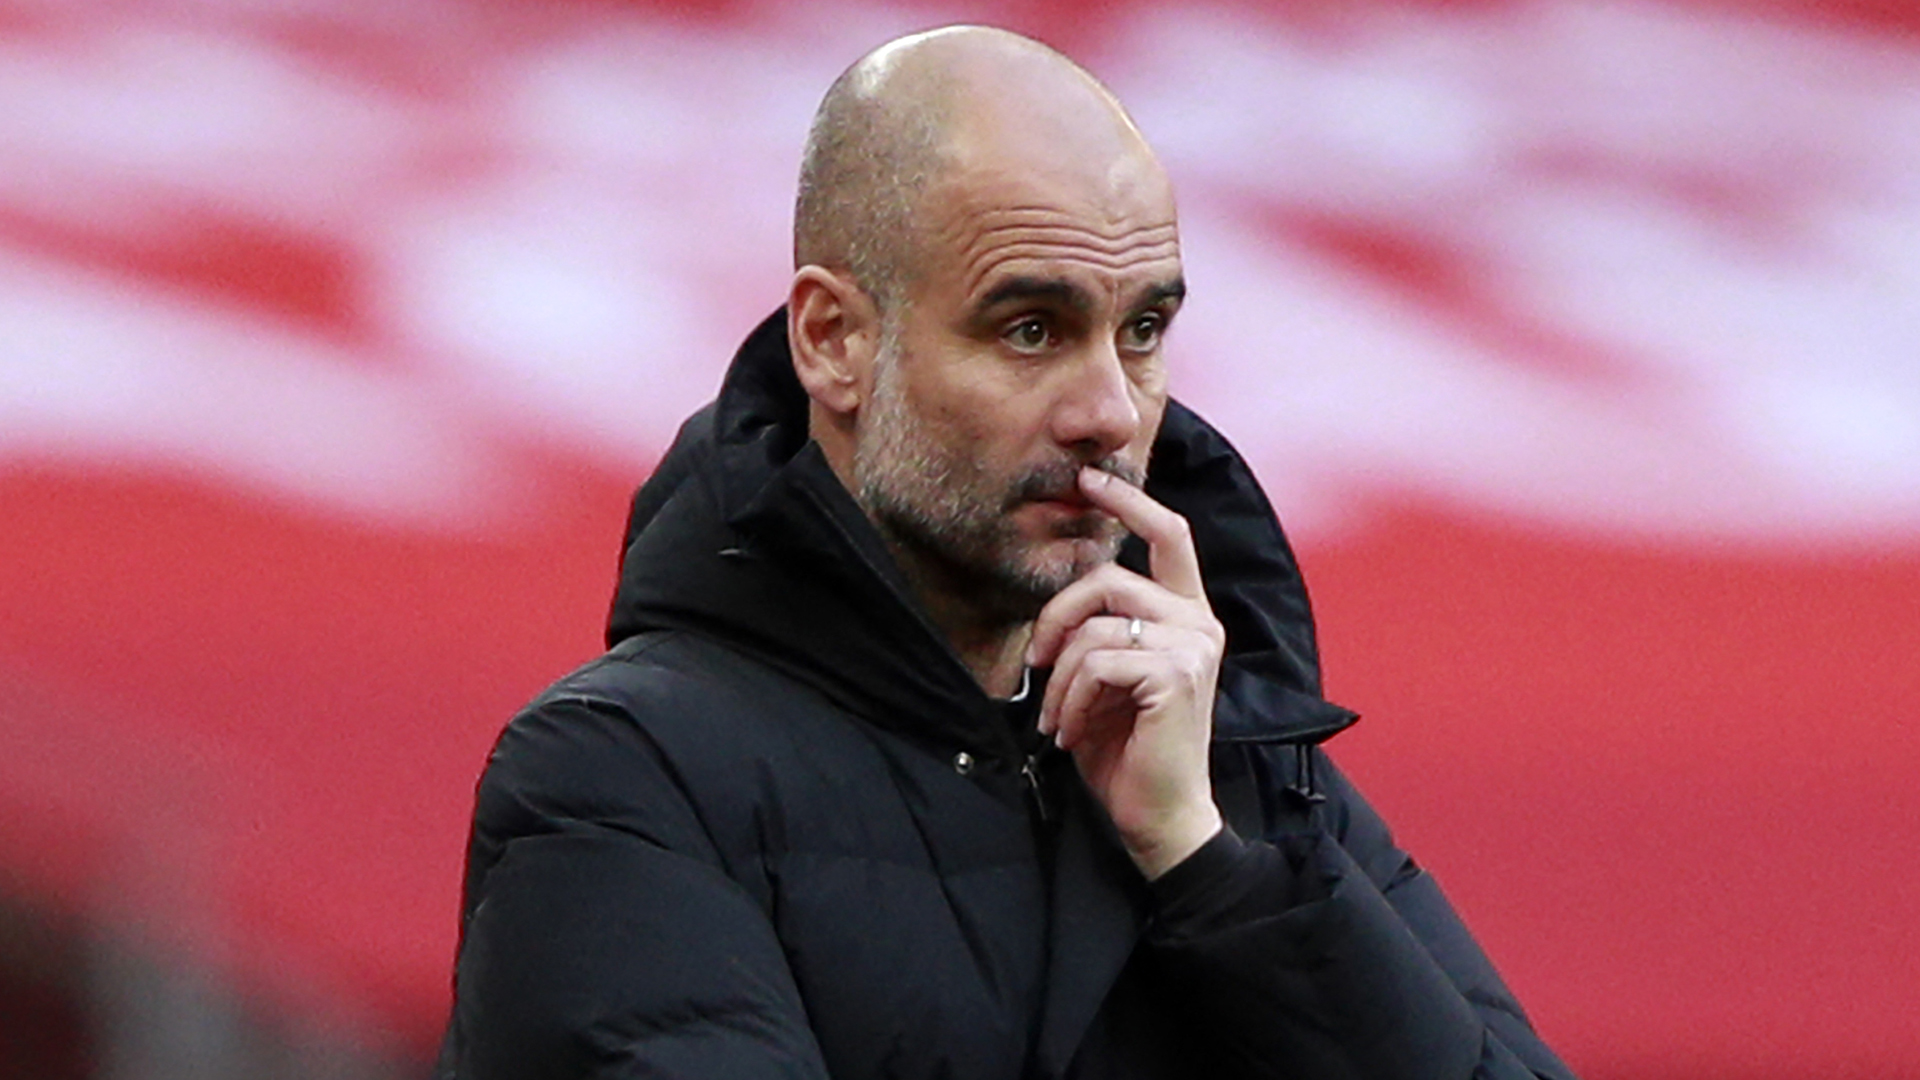 'It’s a closed chapter, it’s over' - Guardiola not seeking apology from Man City hierarchy for Super League debacle